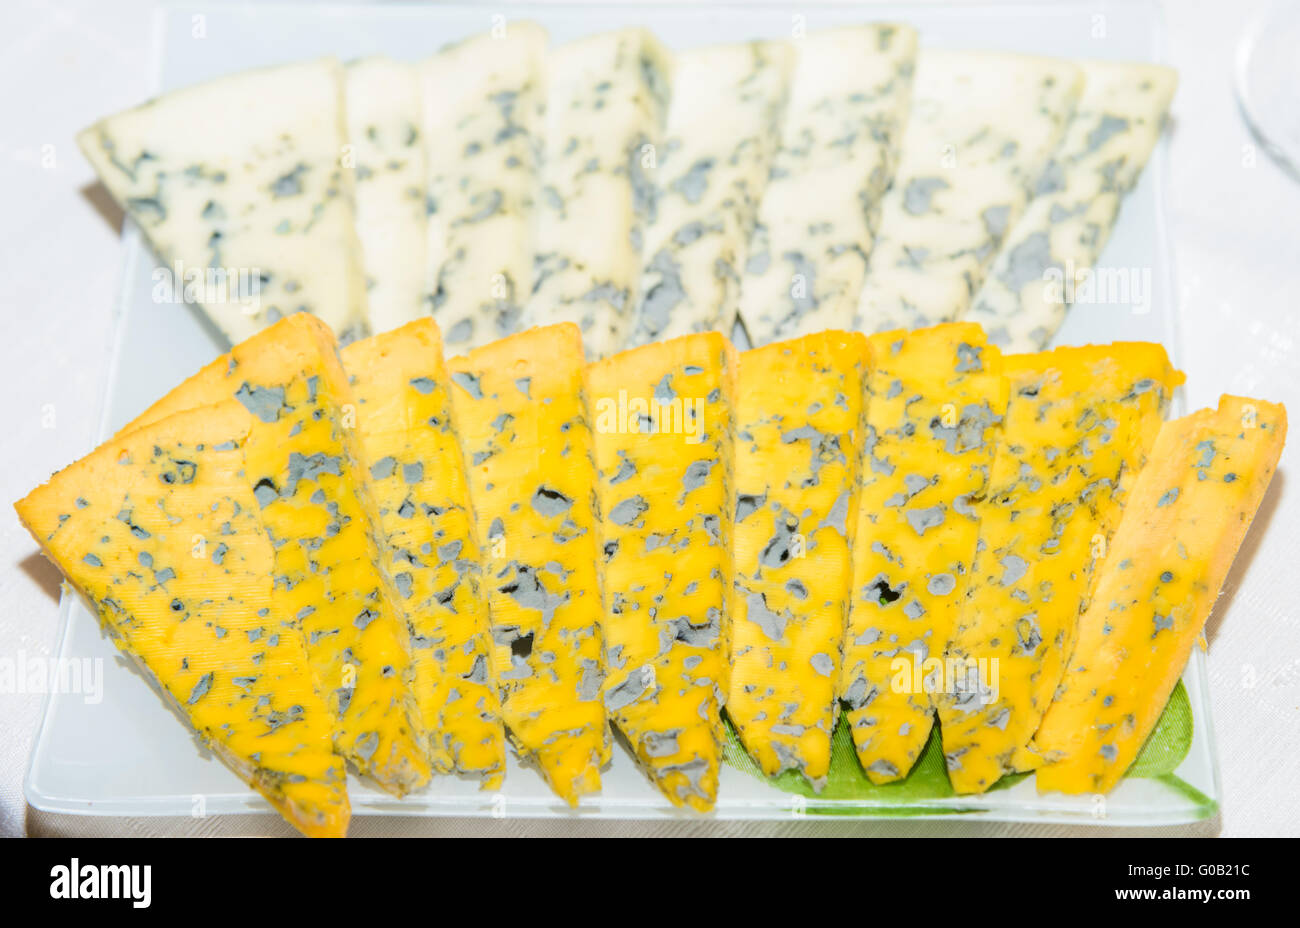 Segment from the yellow Cheese isolated on the white Stock Photo